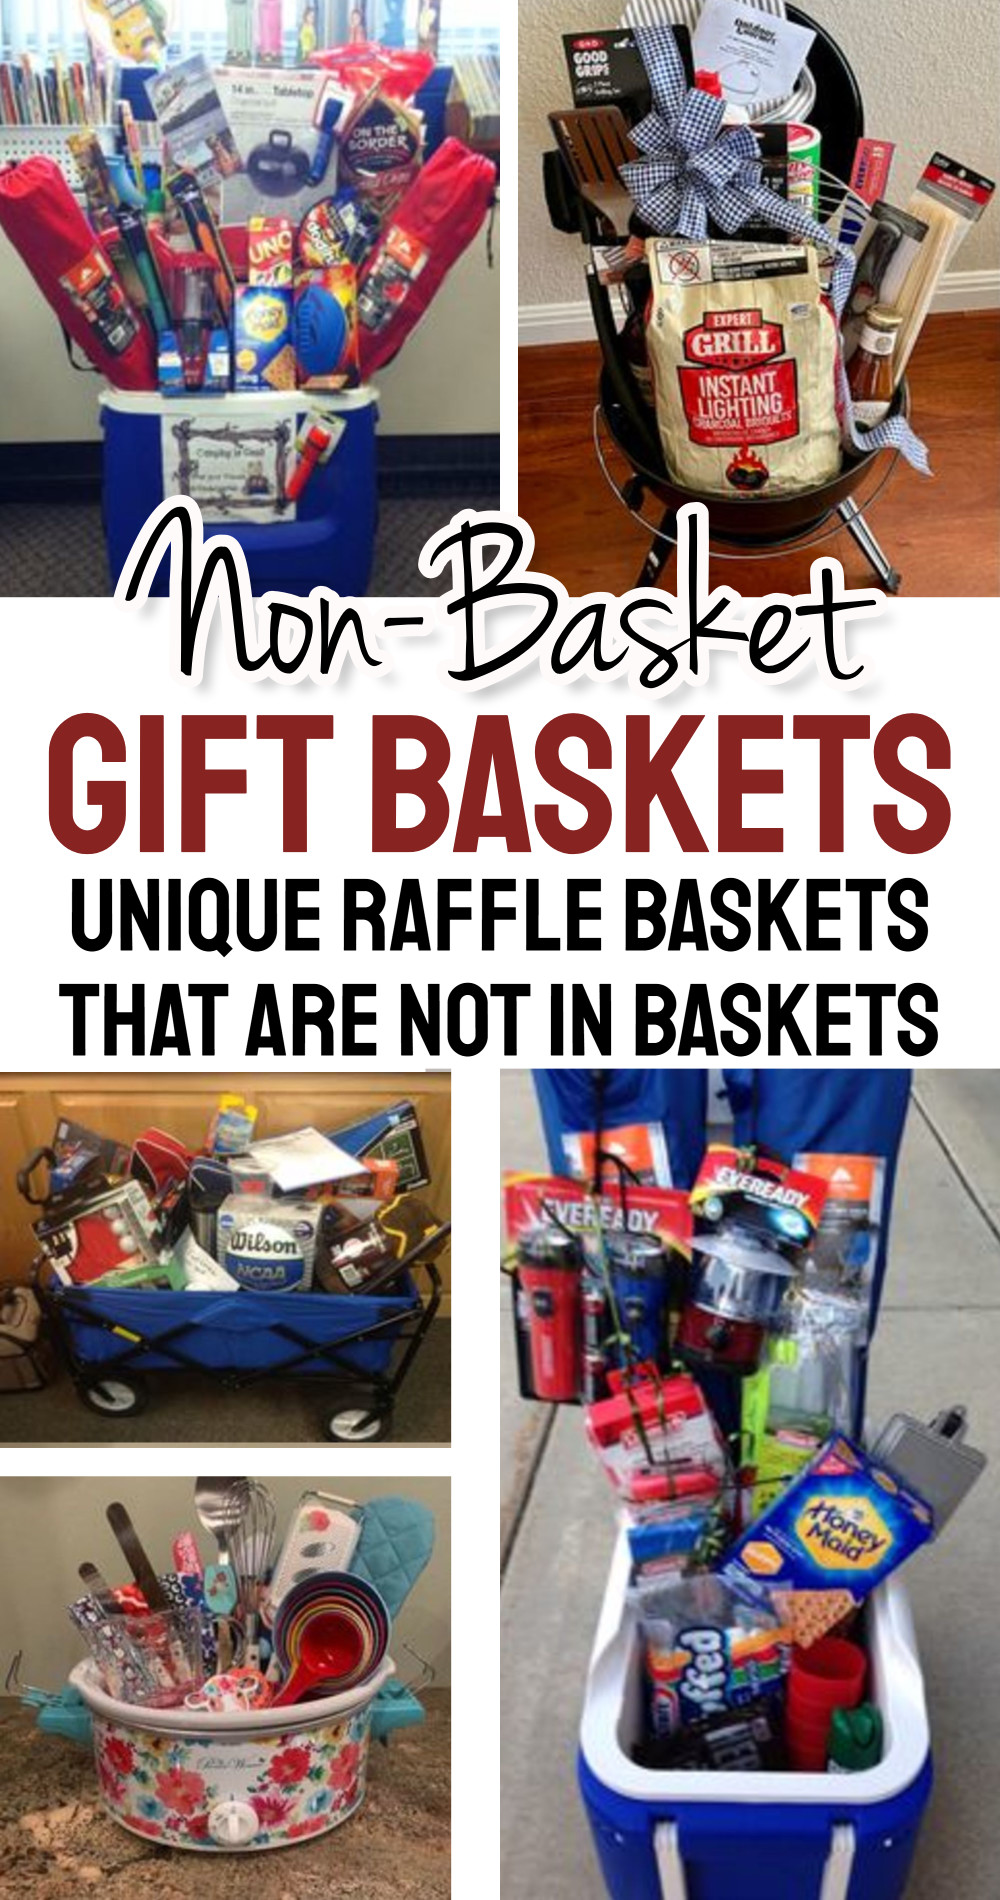 Raffle Baskets Not In Baskets For Fundraiser Auctions